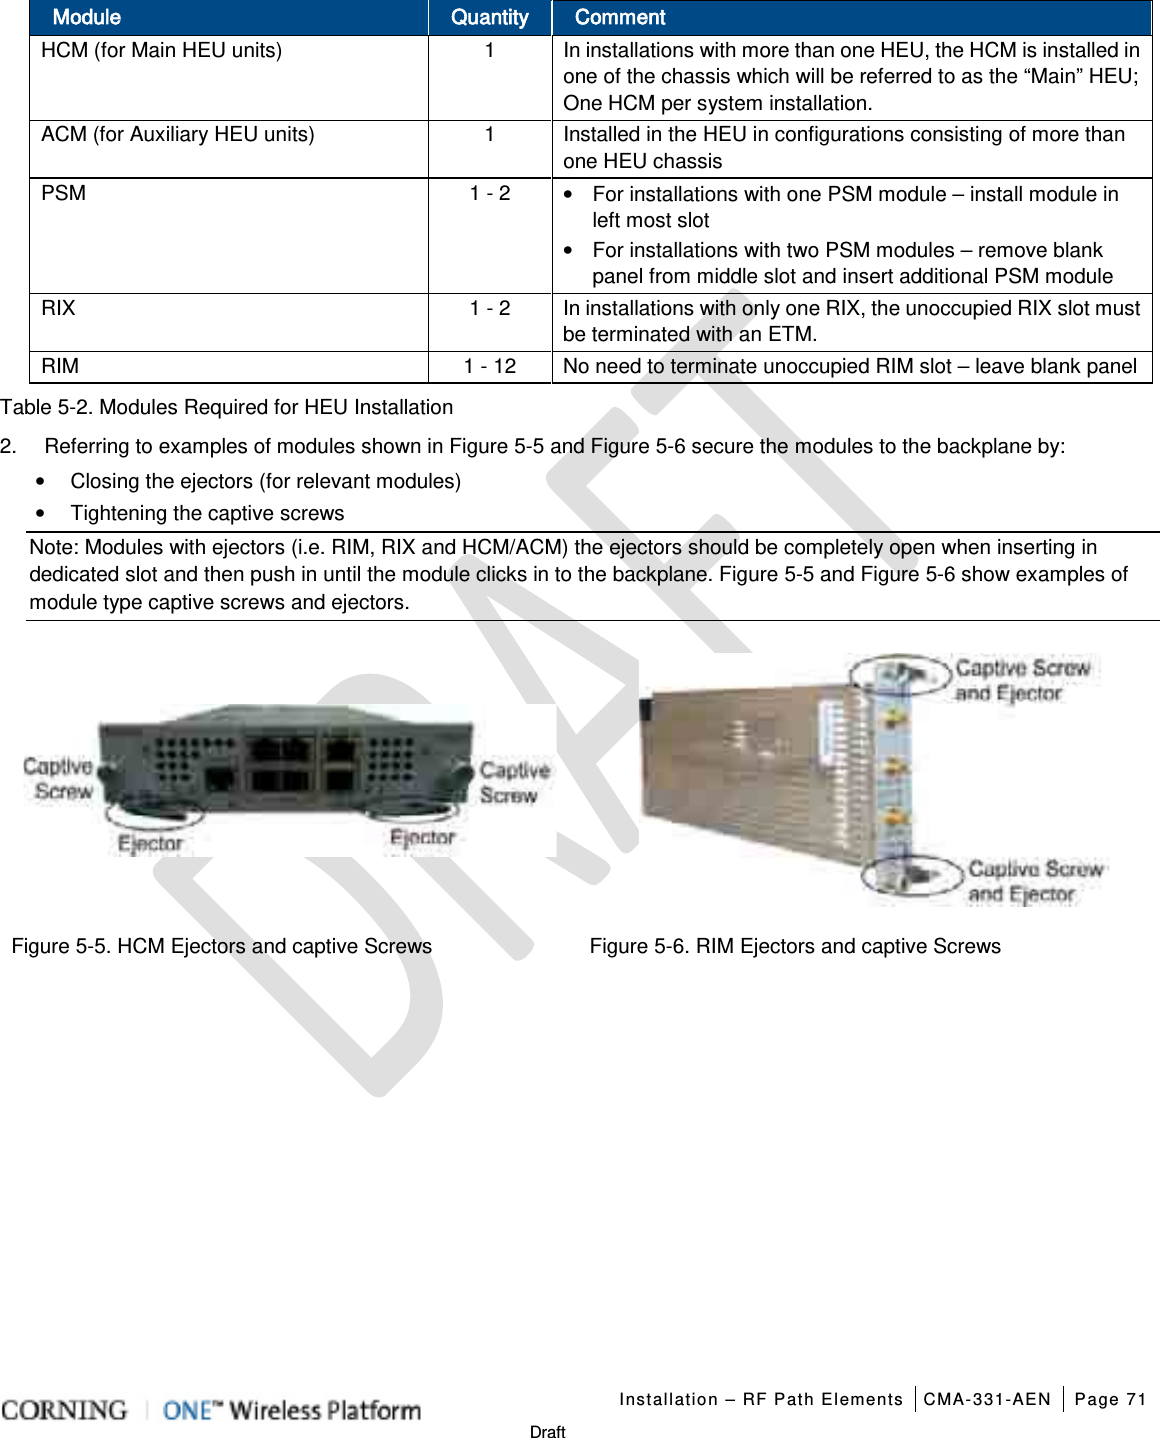   Installation – RF Path Elements CMA-331-AEN Page 71   Draft Module Quantity Comment HCM (for Main HEU units)  1  In installations with more than one HEU, the HCM is installed in one of the chassis which will be referred to as the “Main” HEU; One HCM per system installation.   ACM (for Auxiliary HEU units)  1  Installed in the HEU in configurations consisting of more than one HEU chassis PSM 1 - 2  • For installations with one PSM module – install module in left most slot • For installations with two PSM modules – remove blank panel from middle slot and insert additional PSM module RIX 1 - 2  In installations with only one RIX, the unoccupied RIX slot must be terminated with an ETM. RIM 1 - 12 No need to terminate unoccupied RIM slot – leave blank panel Table  5-2. Modules Required for HEU Installation 2.  Referring to examples of modules shown in Figure  5-5 and Figure  5-6 secure the modules to the backplane by: • Closing the ejectors (for relevant modules) • Tightening the captive screws Note: Modules with ejectors (i.e. RIM, RIX and HCM/ACM) the ejectors should be completely open when inserting in dedicated slot and then push in until the module clicks in to the backplane. Figure  5-5 and Figure  5-6 show examples of module type captive screws and ejectors.   Figure  5-5. HCM Ejectors and captive Screws Figure  5-6. RIM Ejectors and captive Screws    